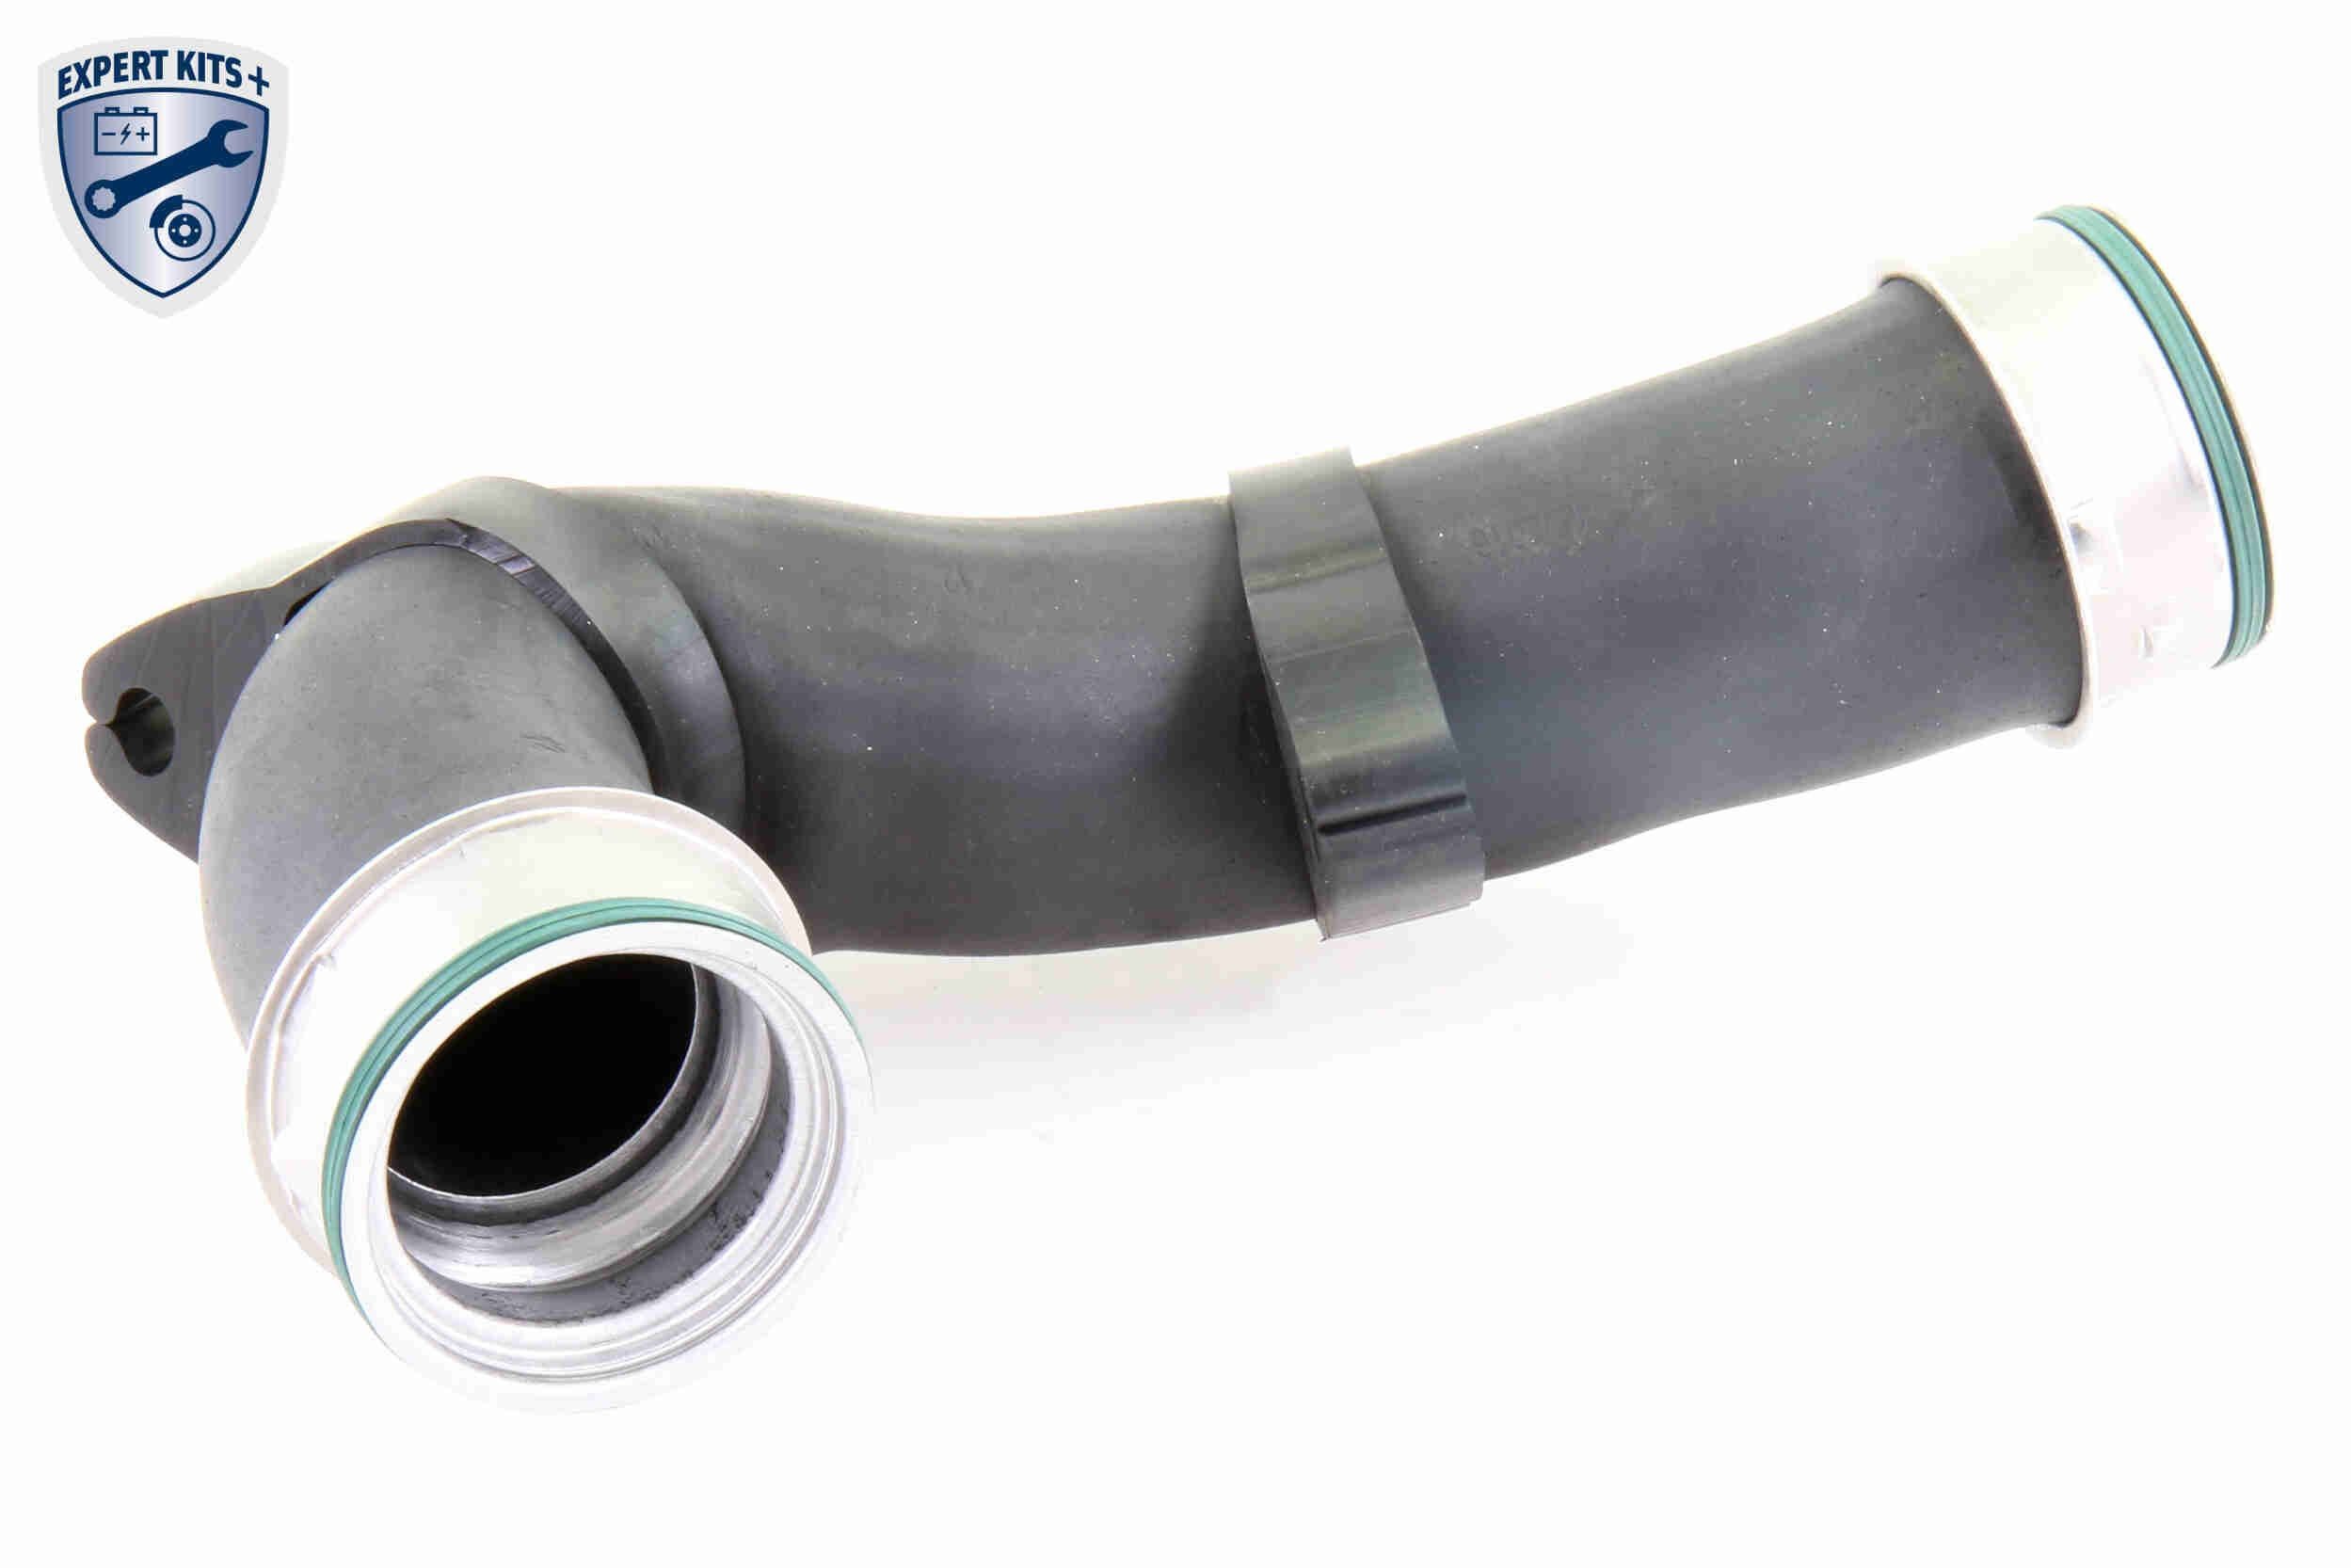 V105313 Charger Intake Hose EXPERT KITS + VAICO V10-5313 review and test